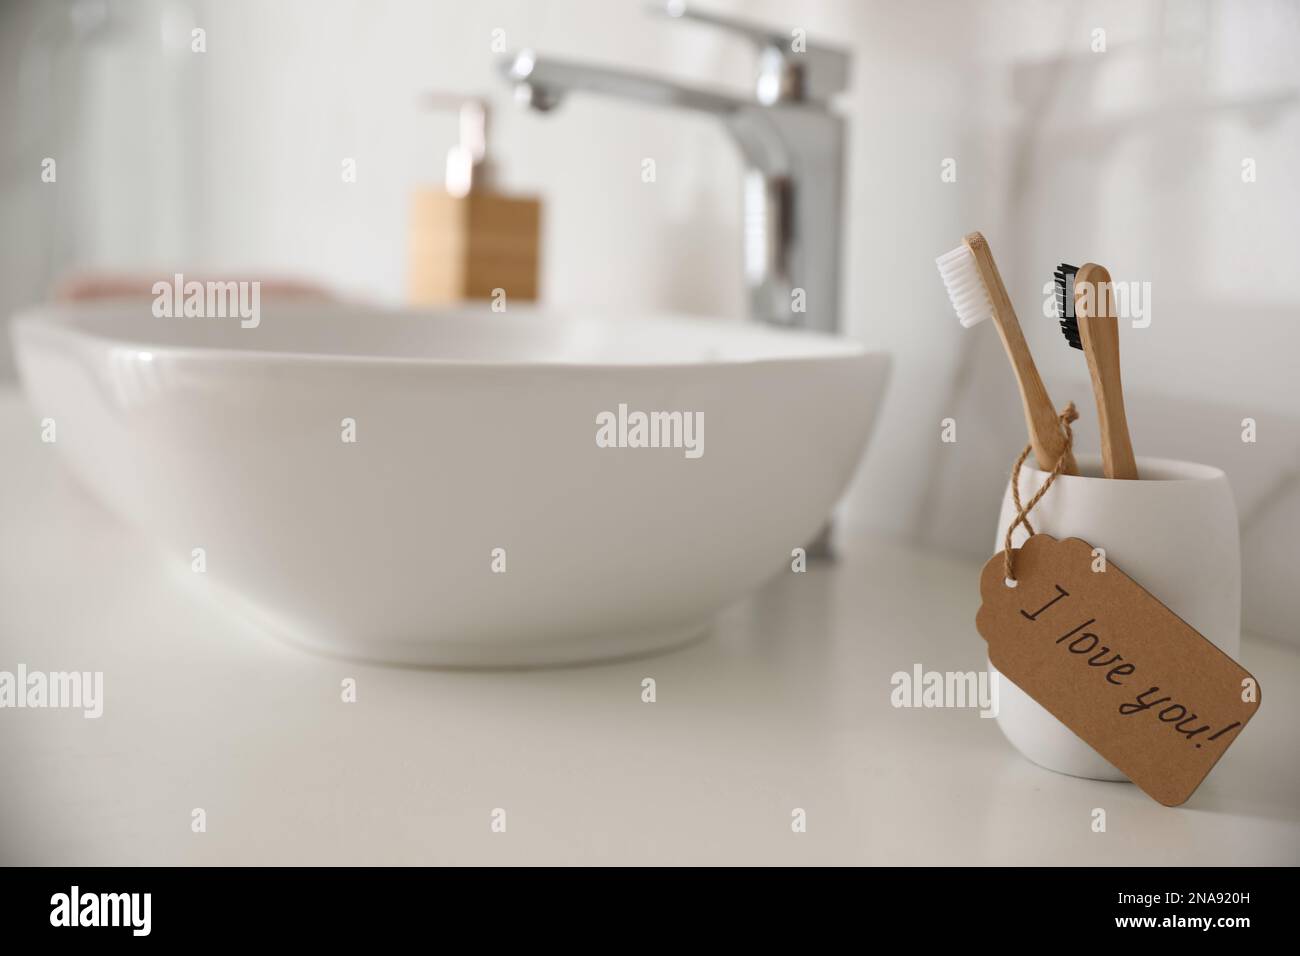 Tag with handwritten text I Love you on toothbrush in bathroom. Romantic message Stock Photo